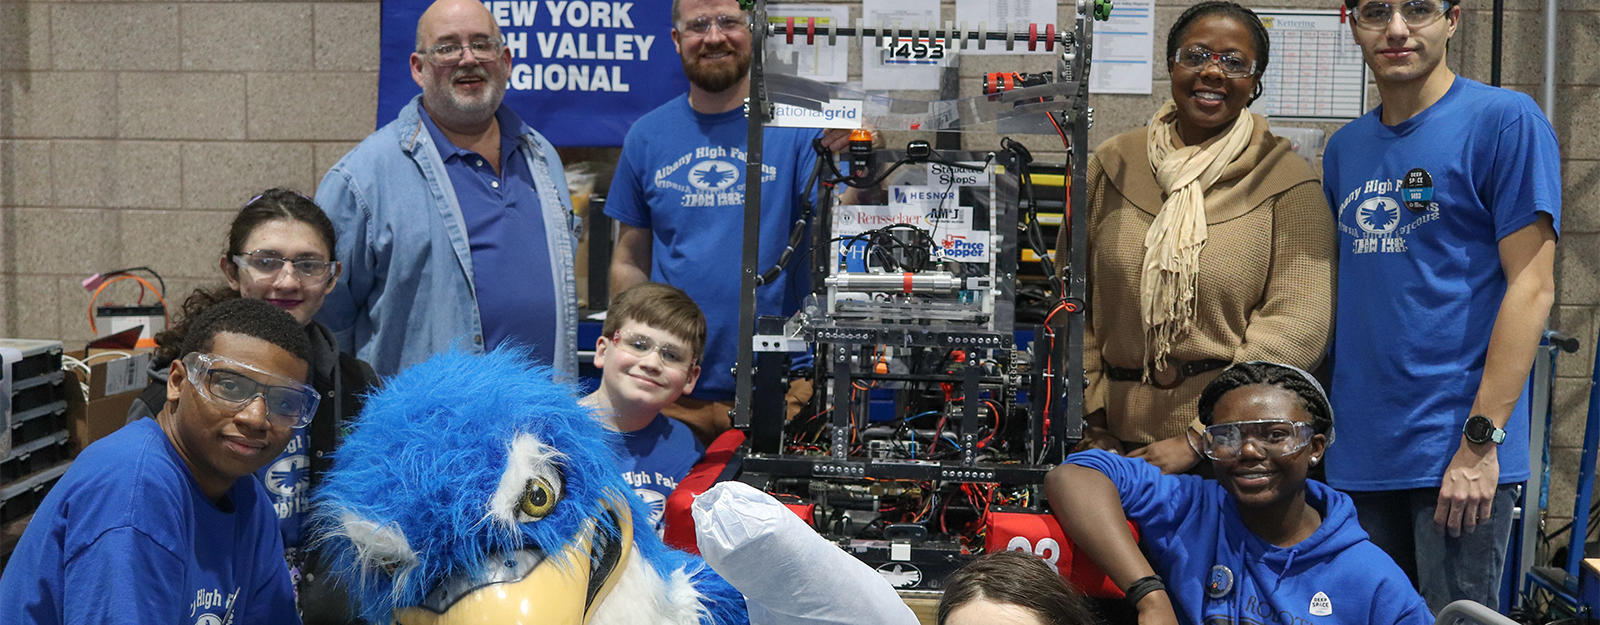 Robotics team posing for a group picture with the 33Ƶ High Falcon mascot.